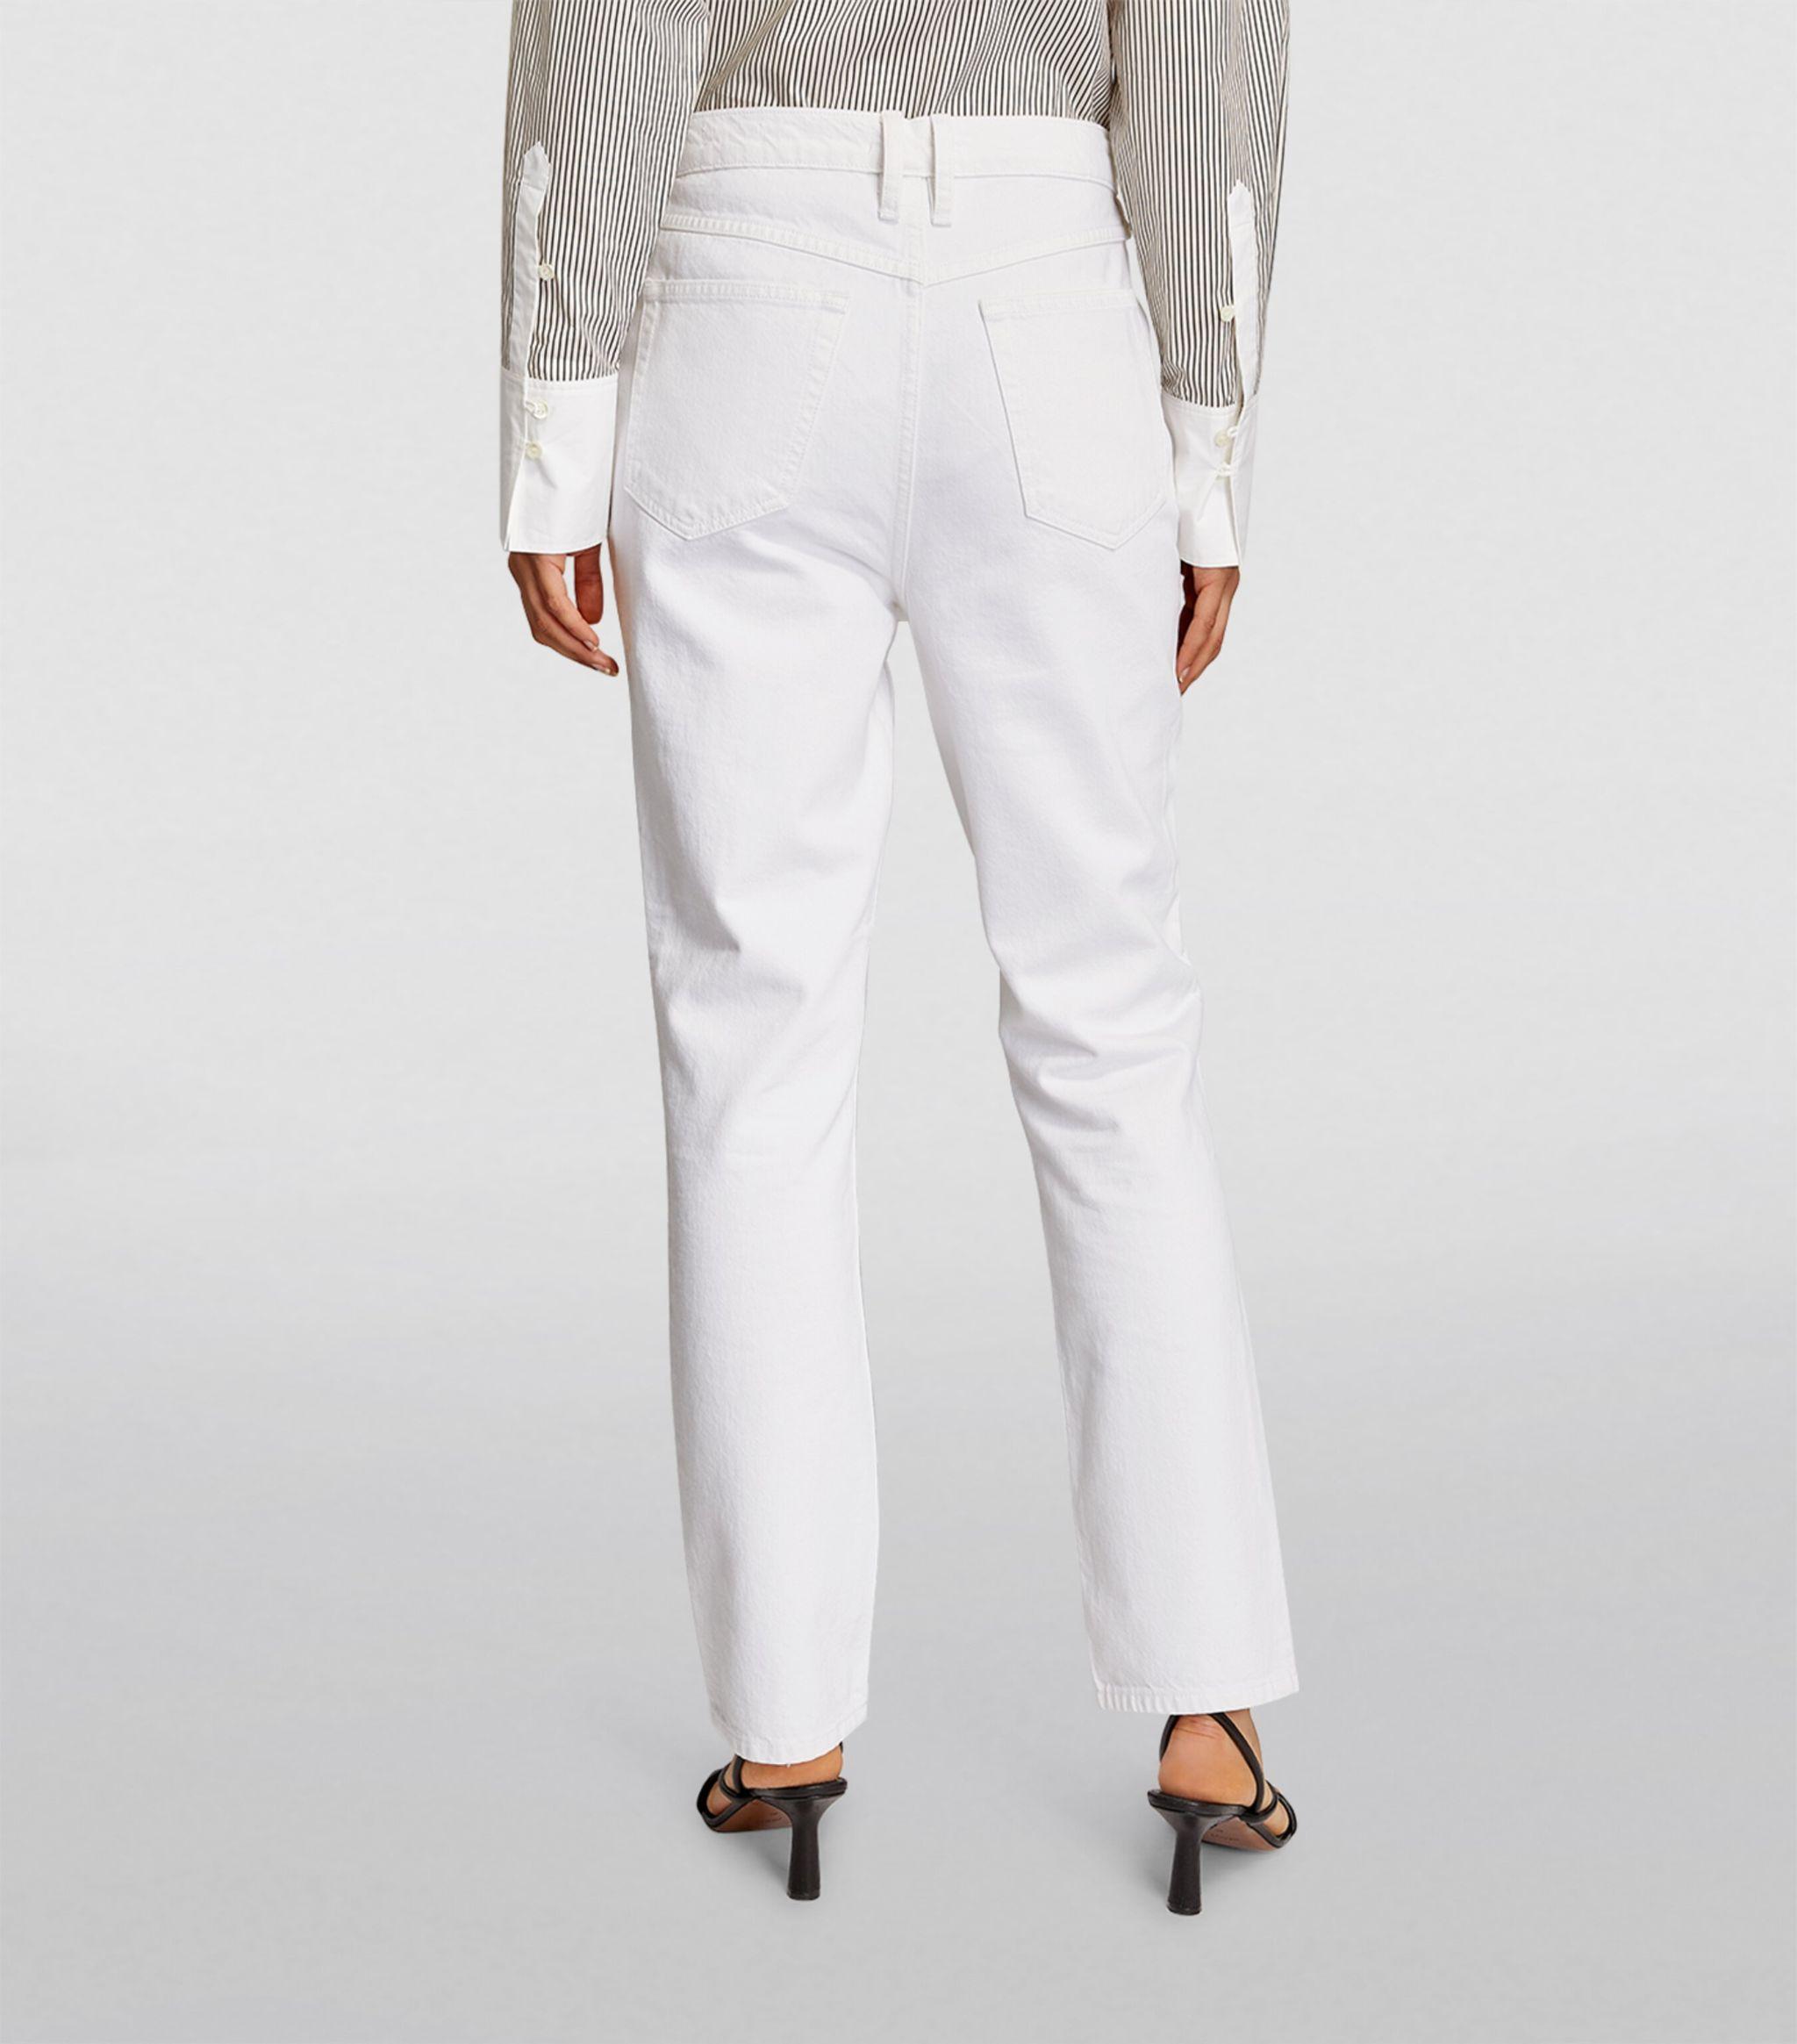 FRAME Le High 'n' Tight High-rise Straight Jeans in White | Lyst